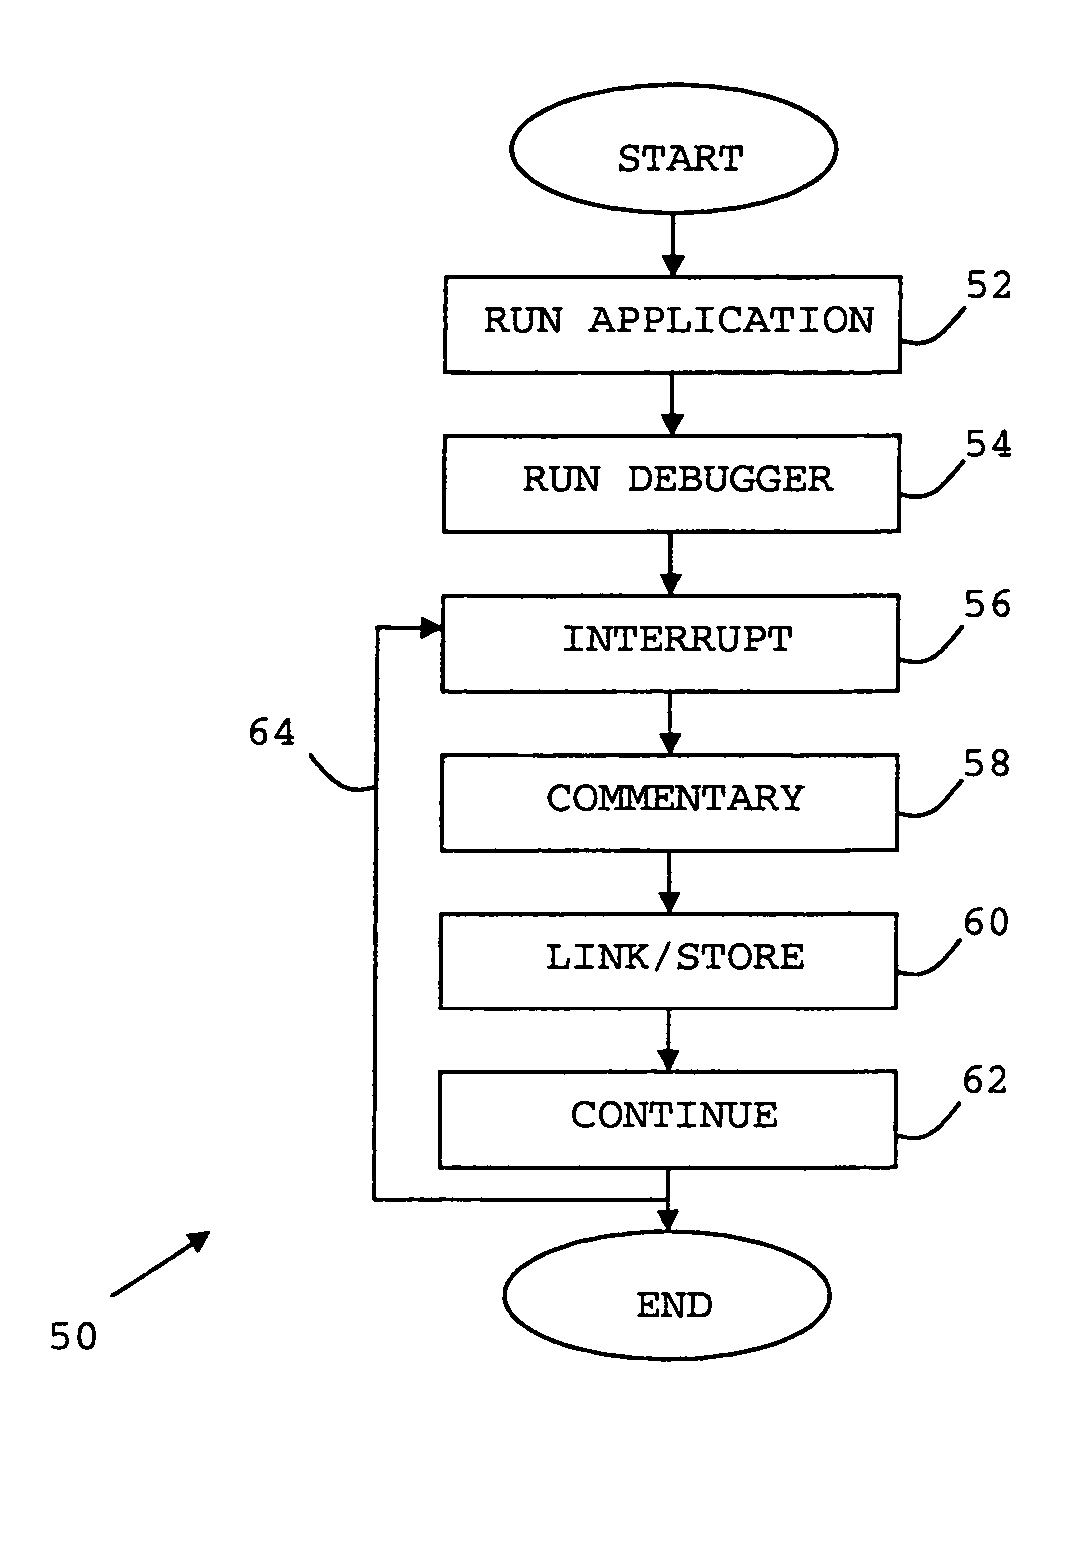 System and method for software debugging